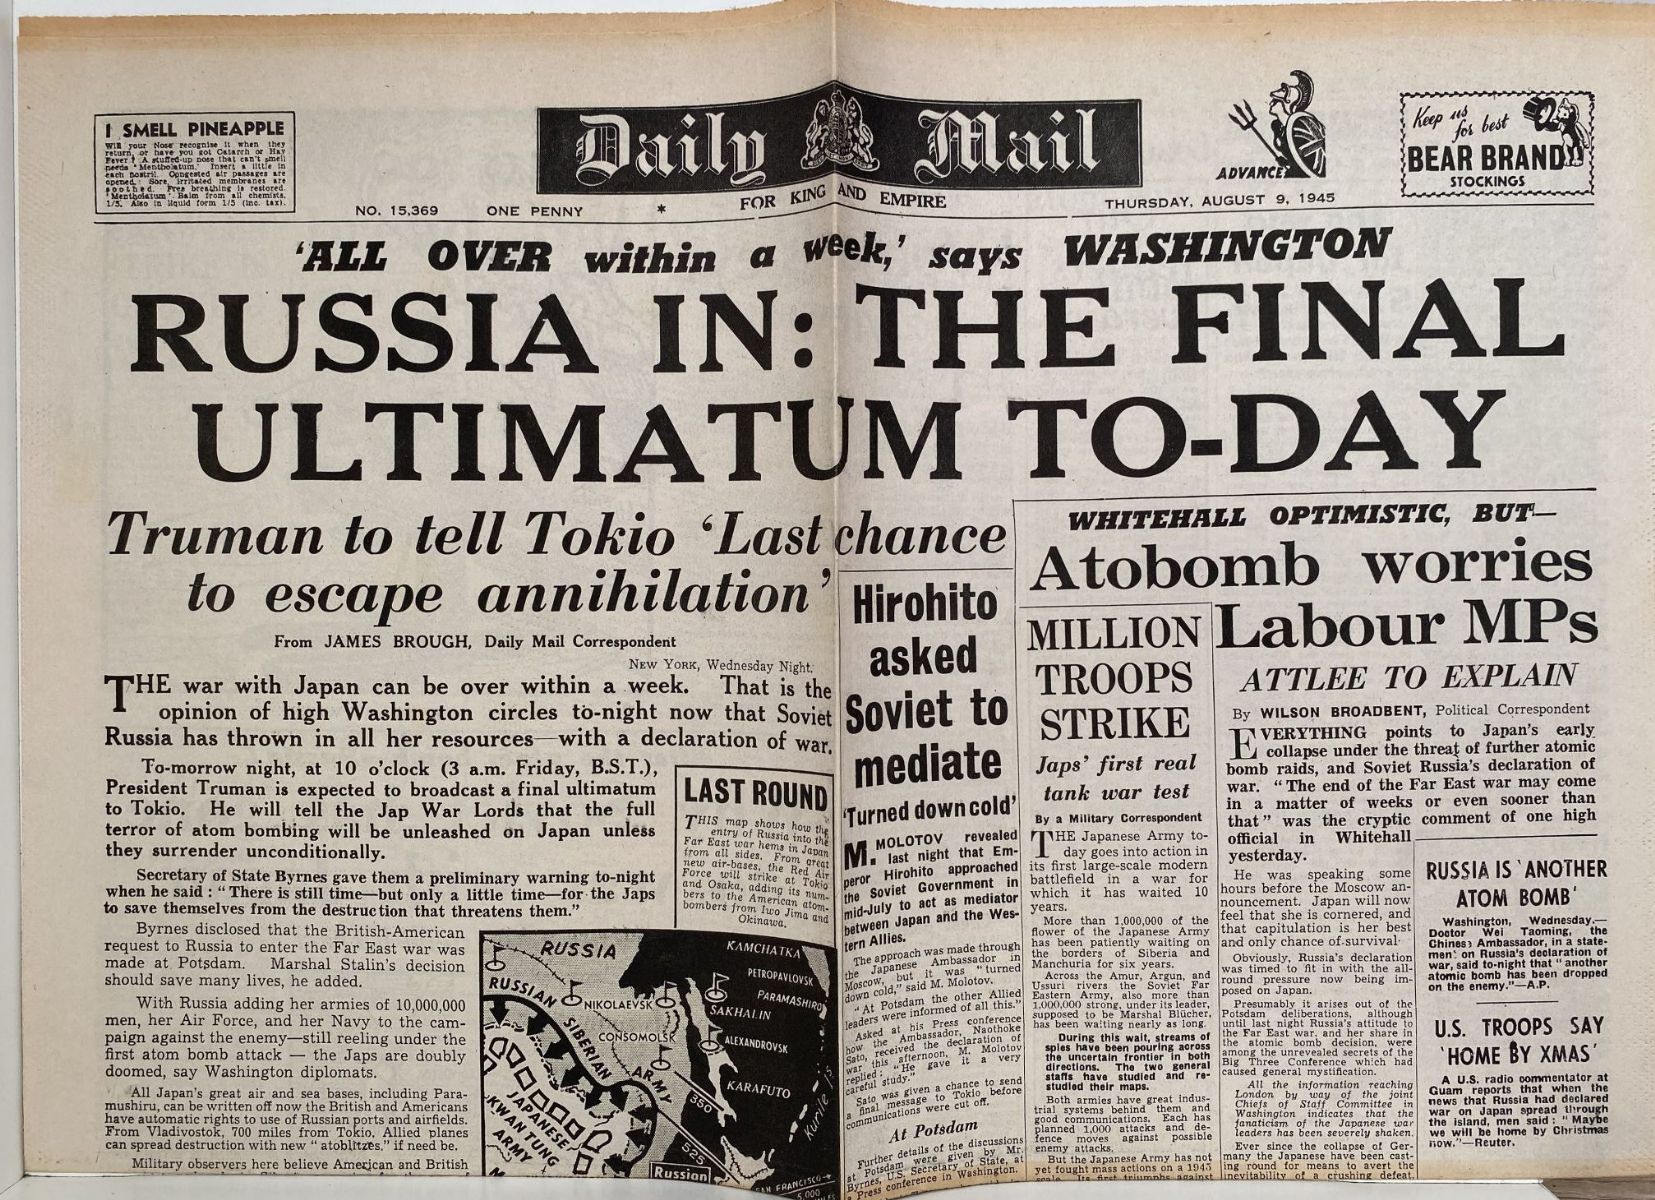 OLD WARTIME NEWSPAPER: Daily Mail, Thursday 9th August 1945